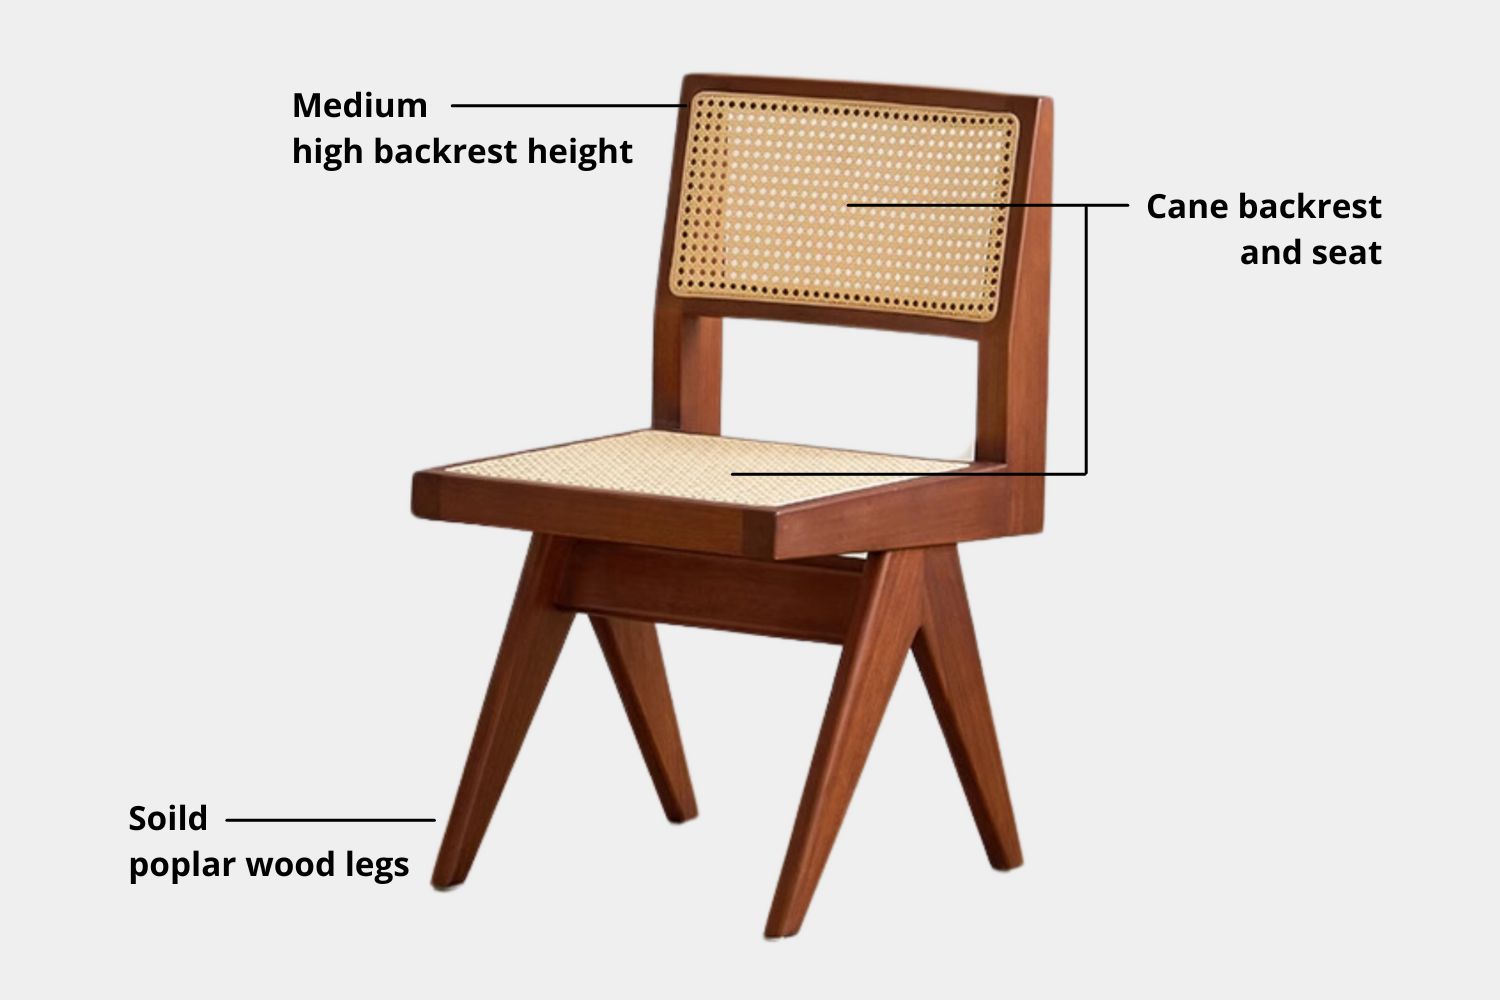 Key features for product for Tara Poplar Wood Chair